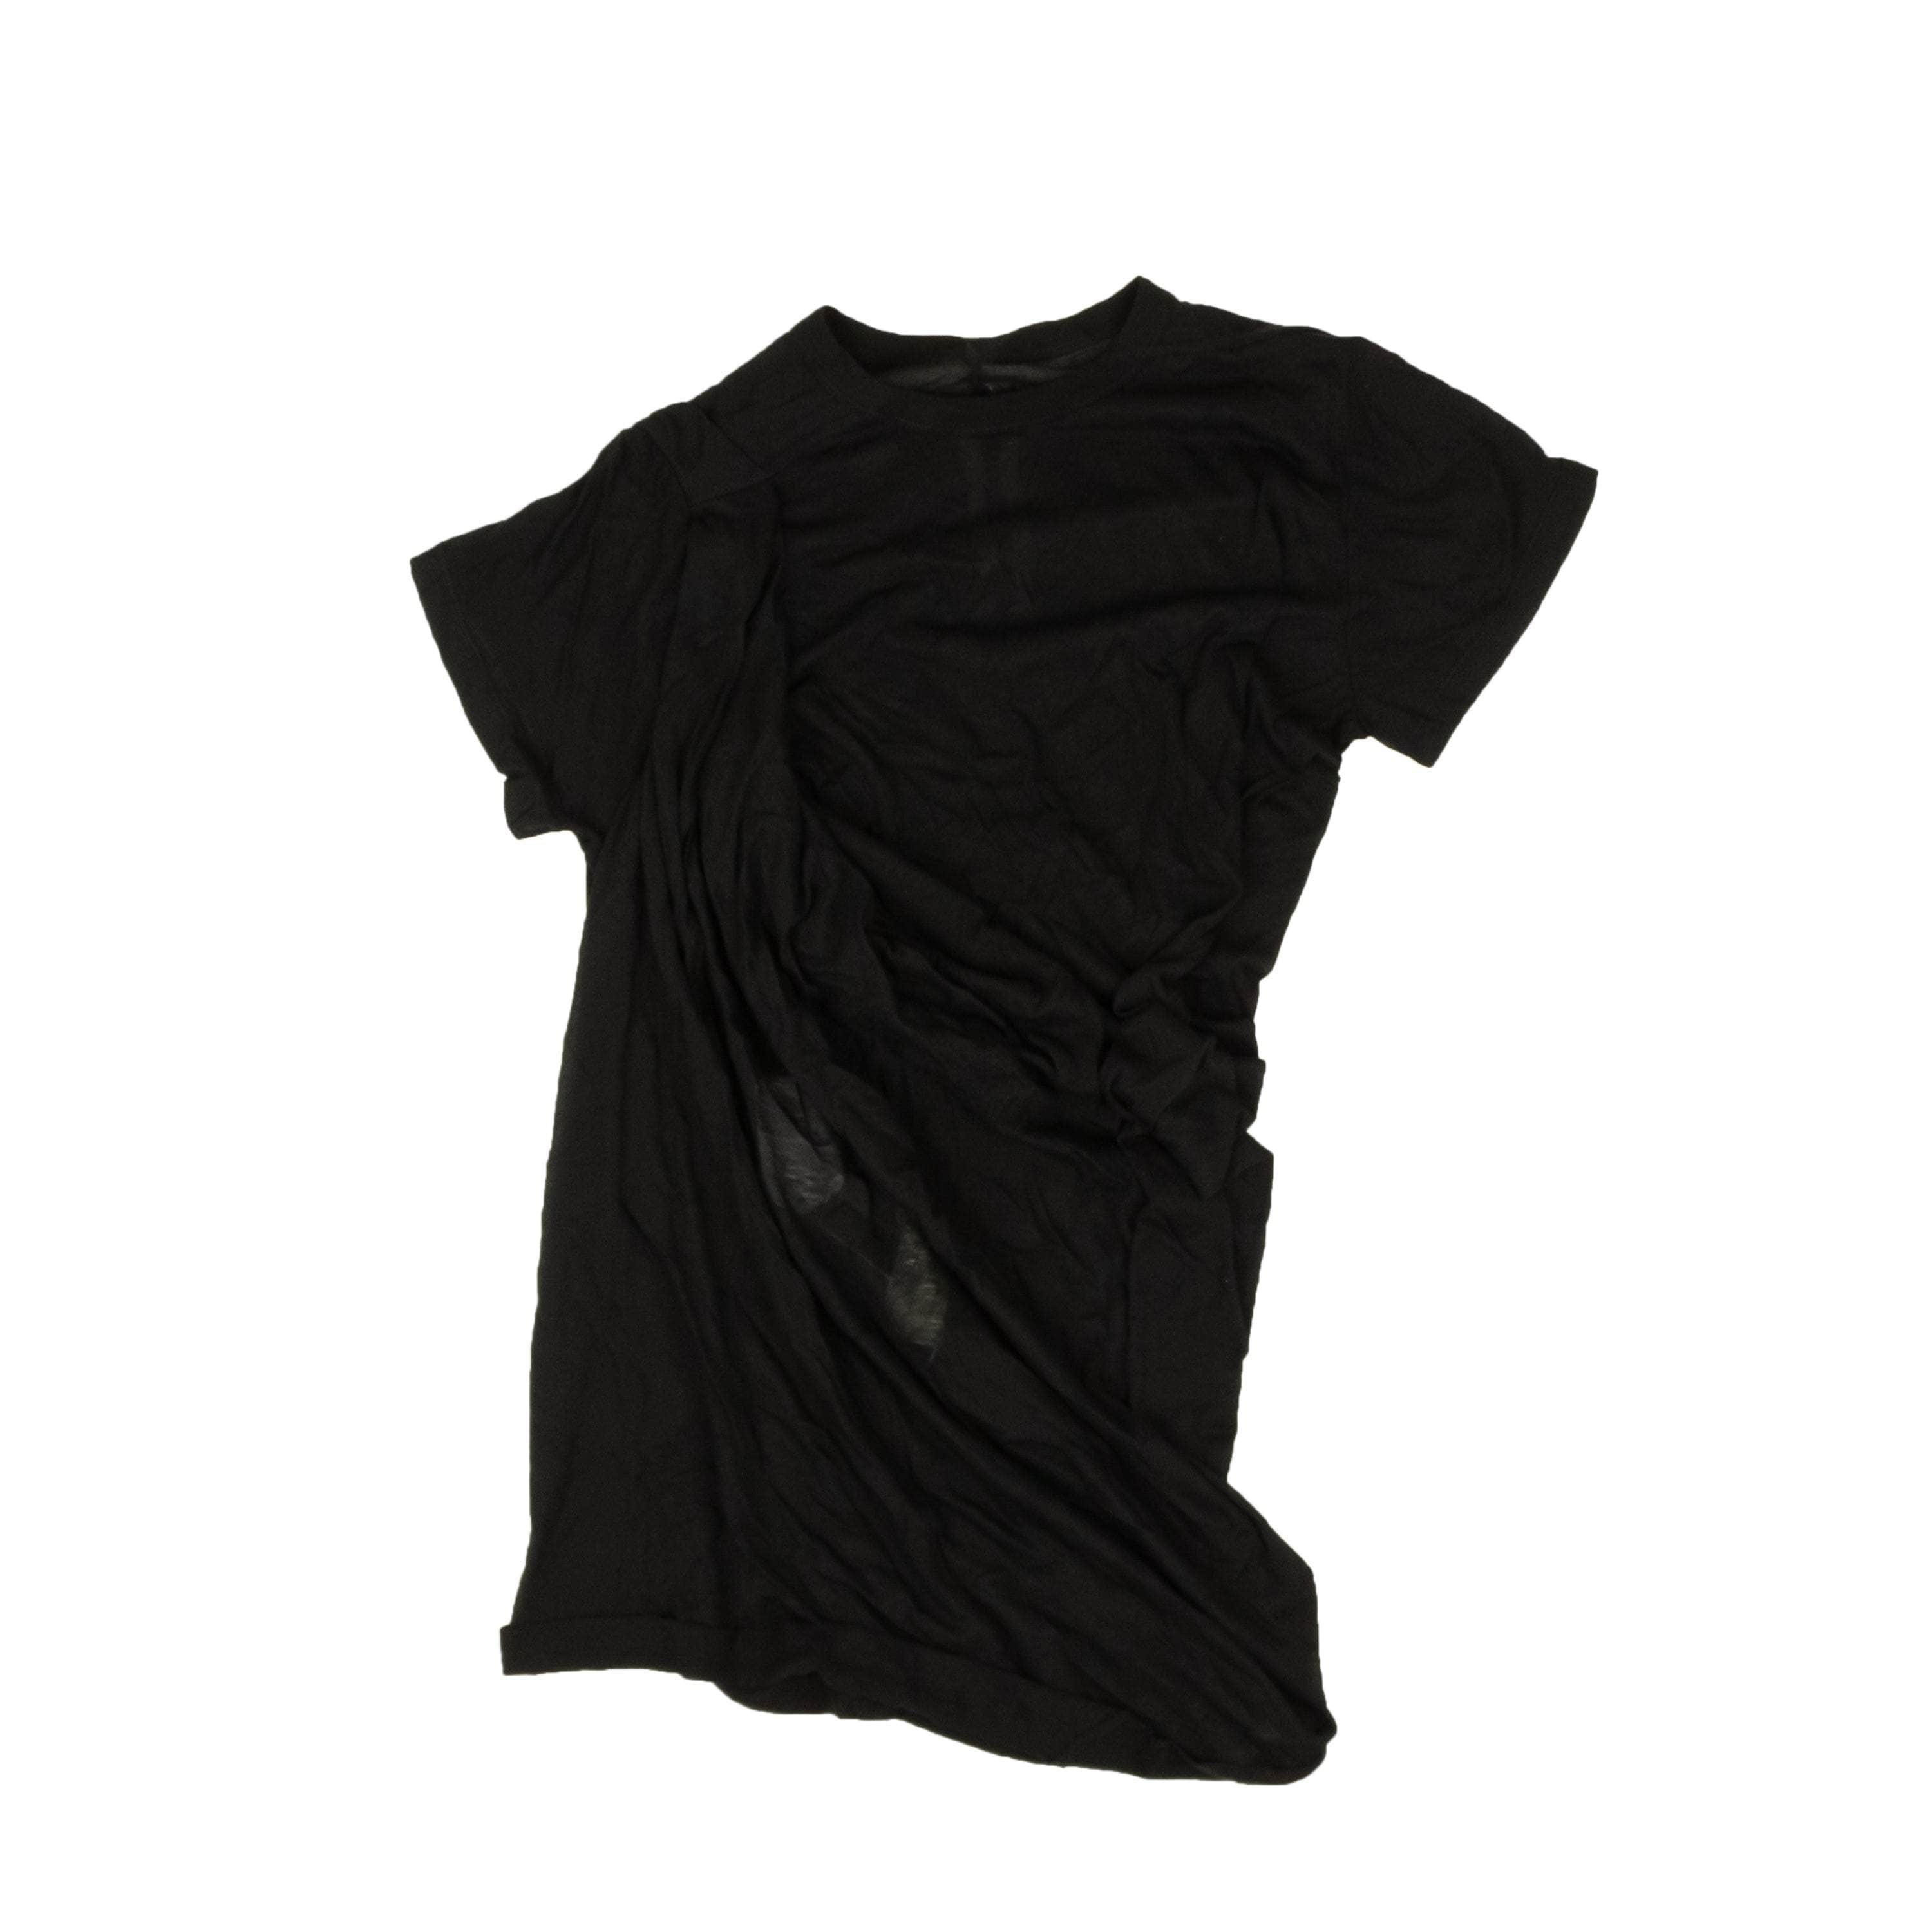 Rick Owens channelenable-all, chicmi, couponcollection, gender-womens, main-clothing, rick-owens, size-42, under-250 42 Black Cotton Anthem Short Sleeve T-Shirt 95-ROW-1027/42 95-ROW-1027/42